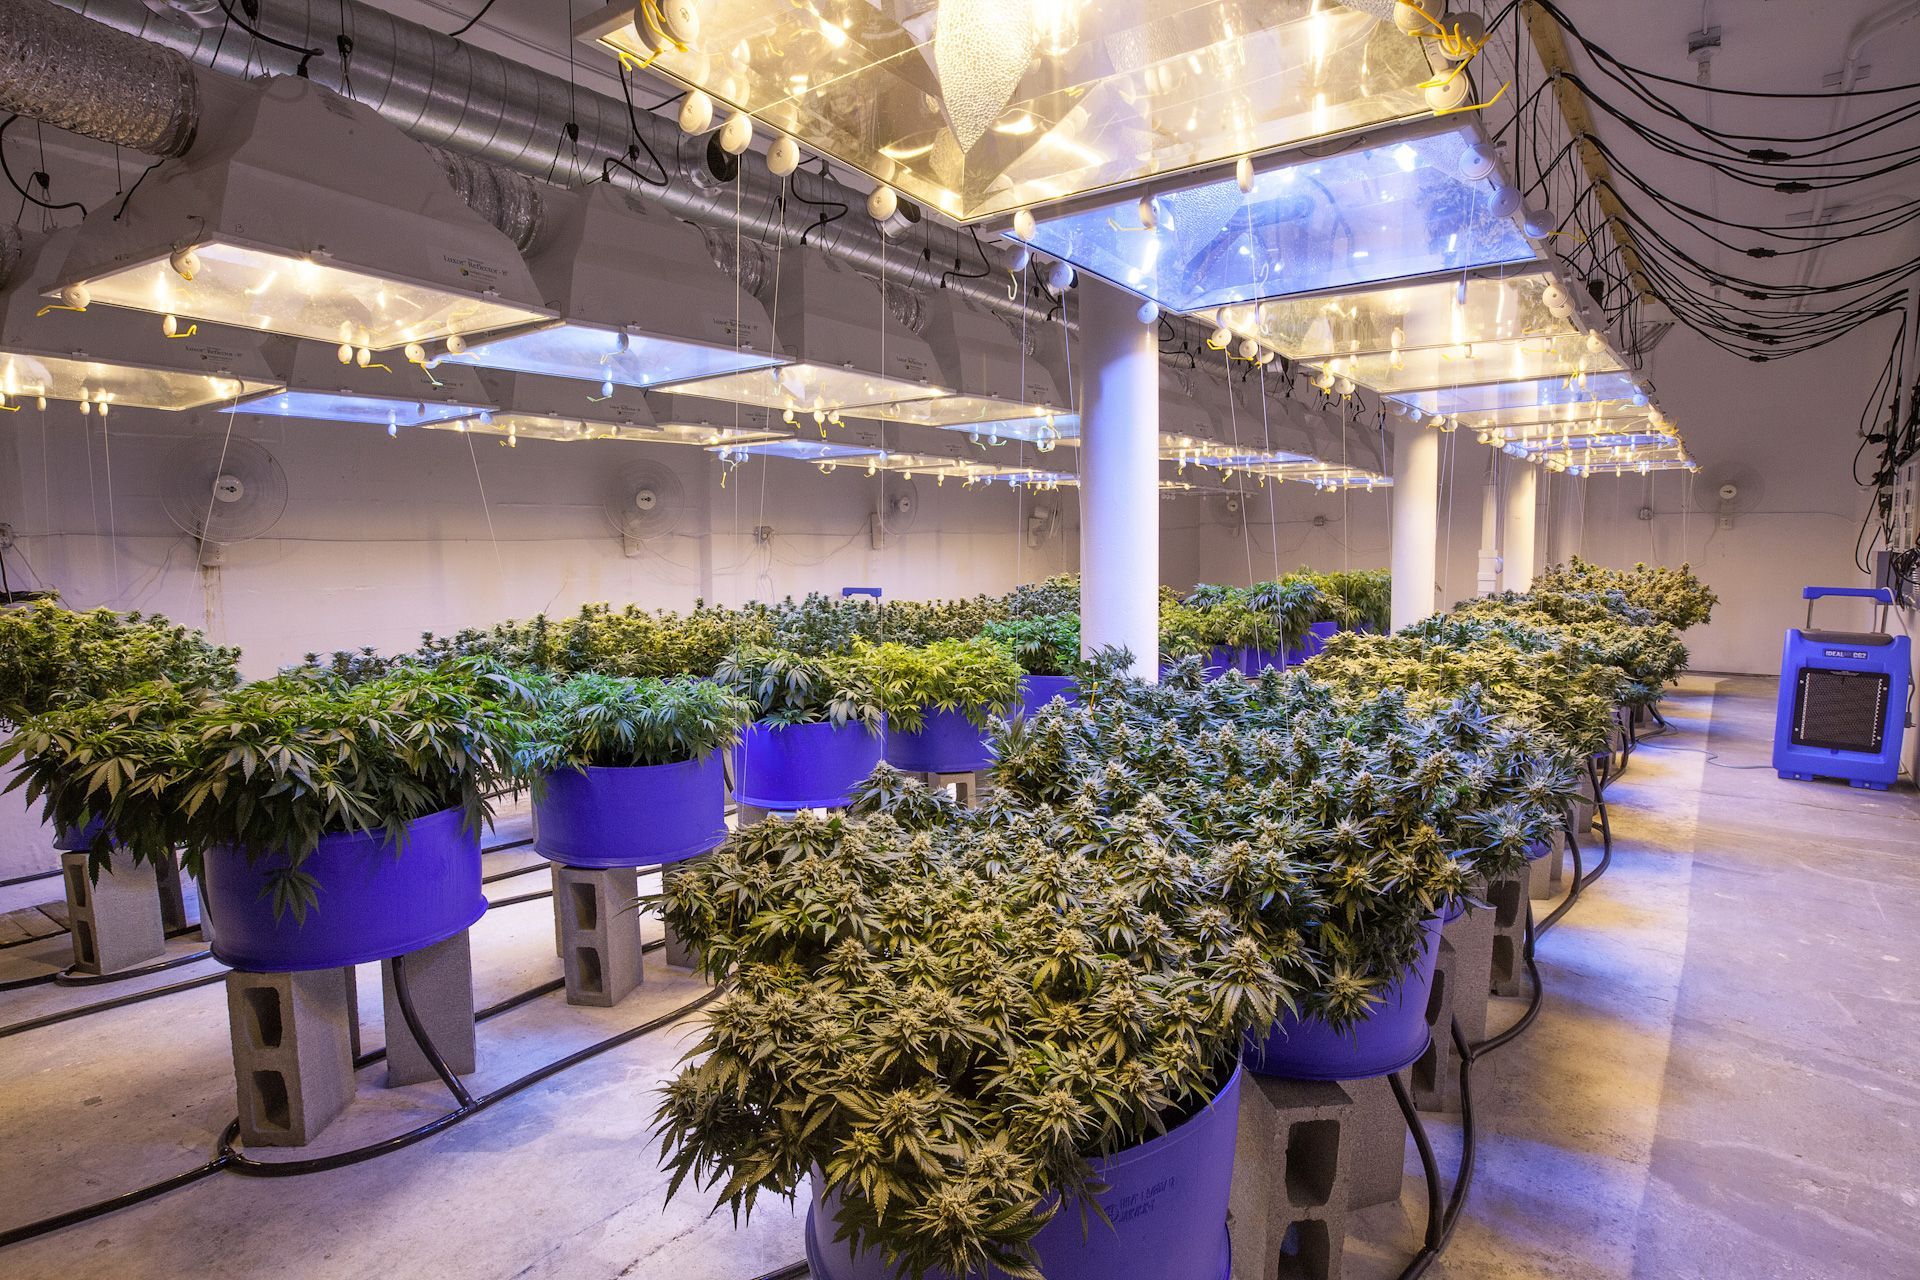 Room for commercial Cannabis Grow